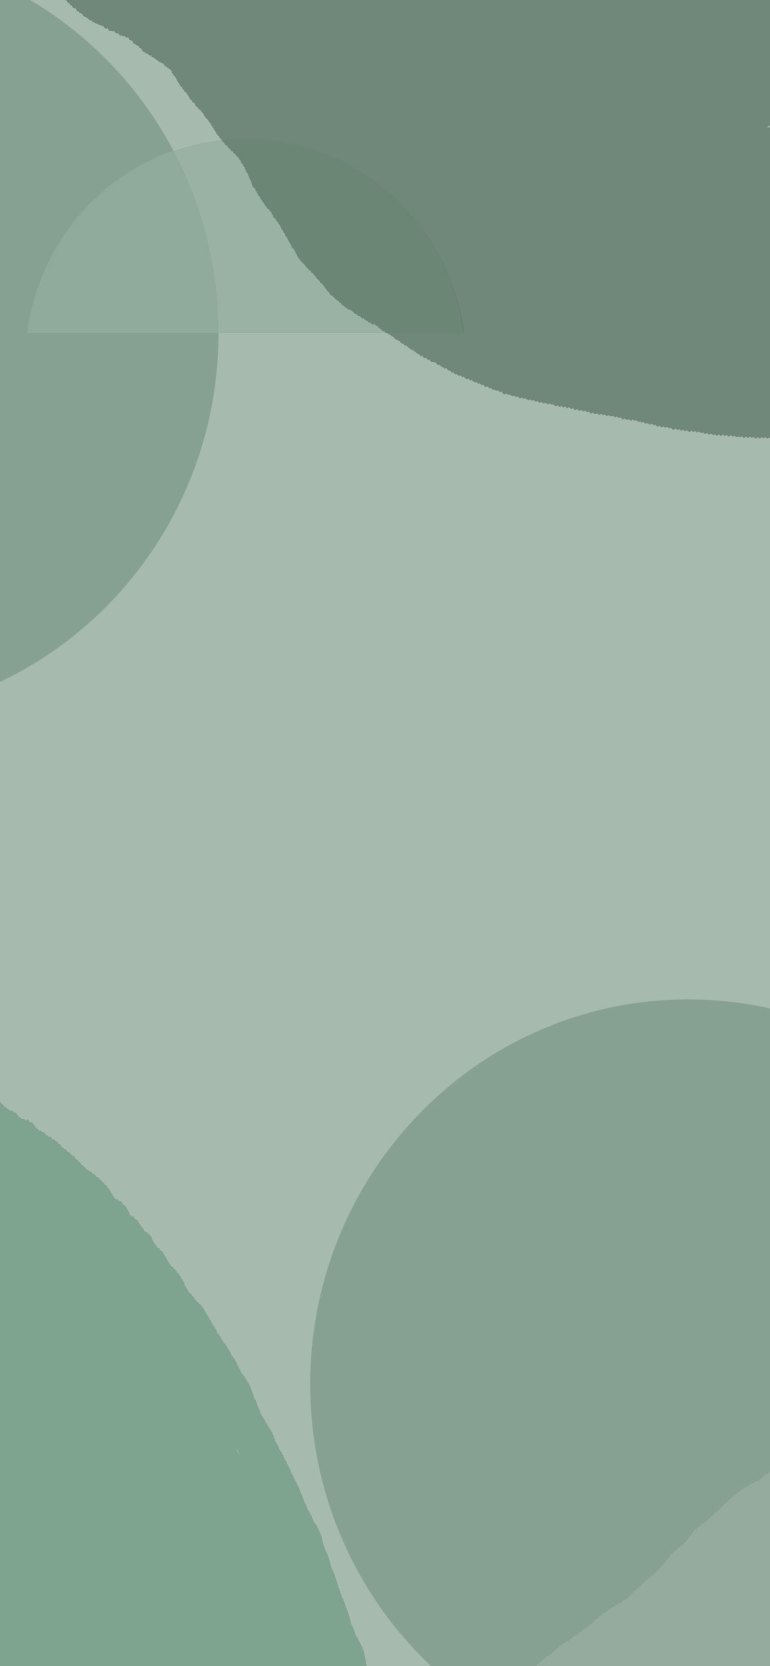 Sage Green Aesthetic Wallpaper, Boho Abstract Sage Green Background Wallpaper